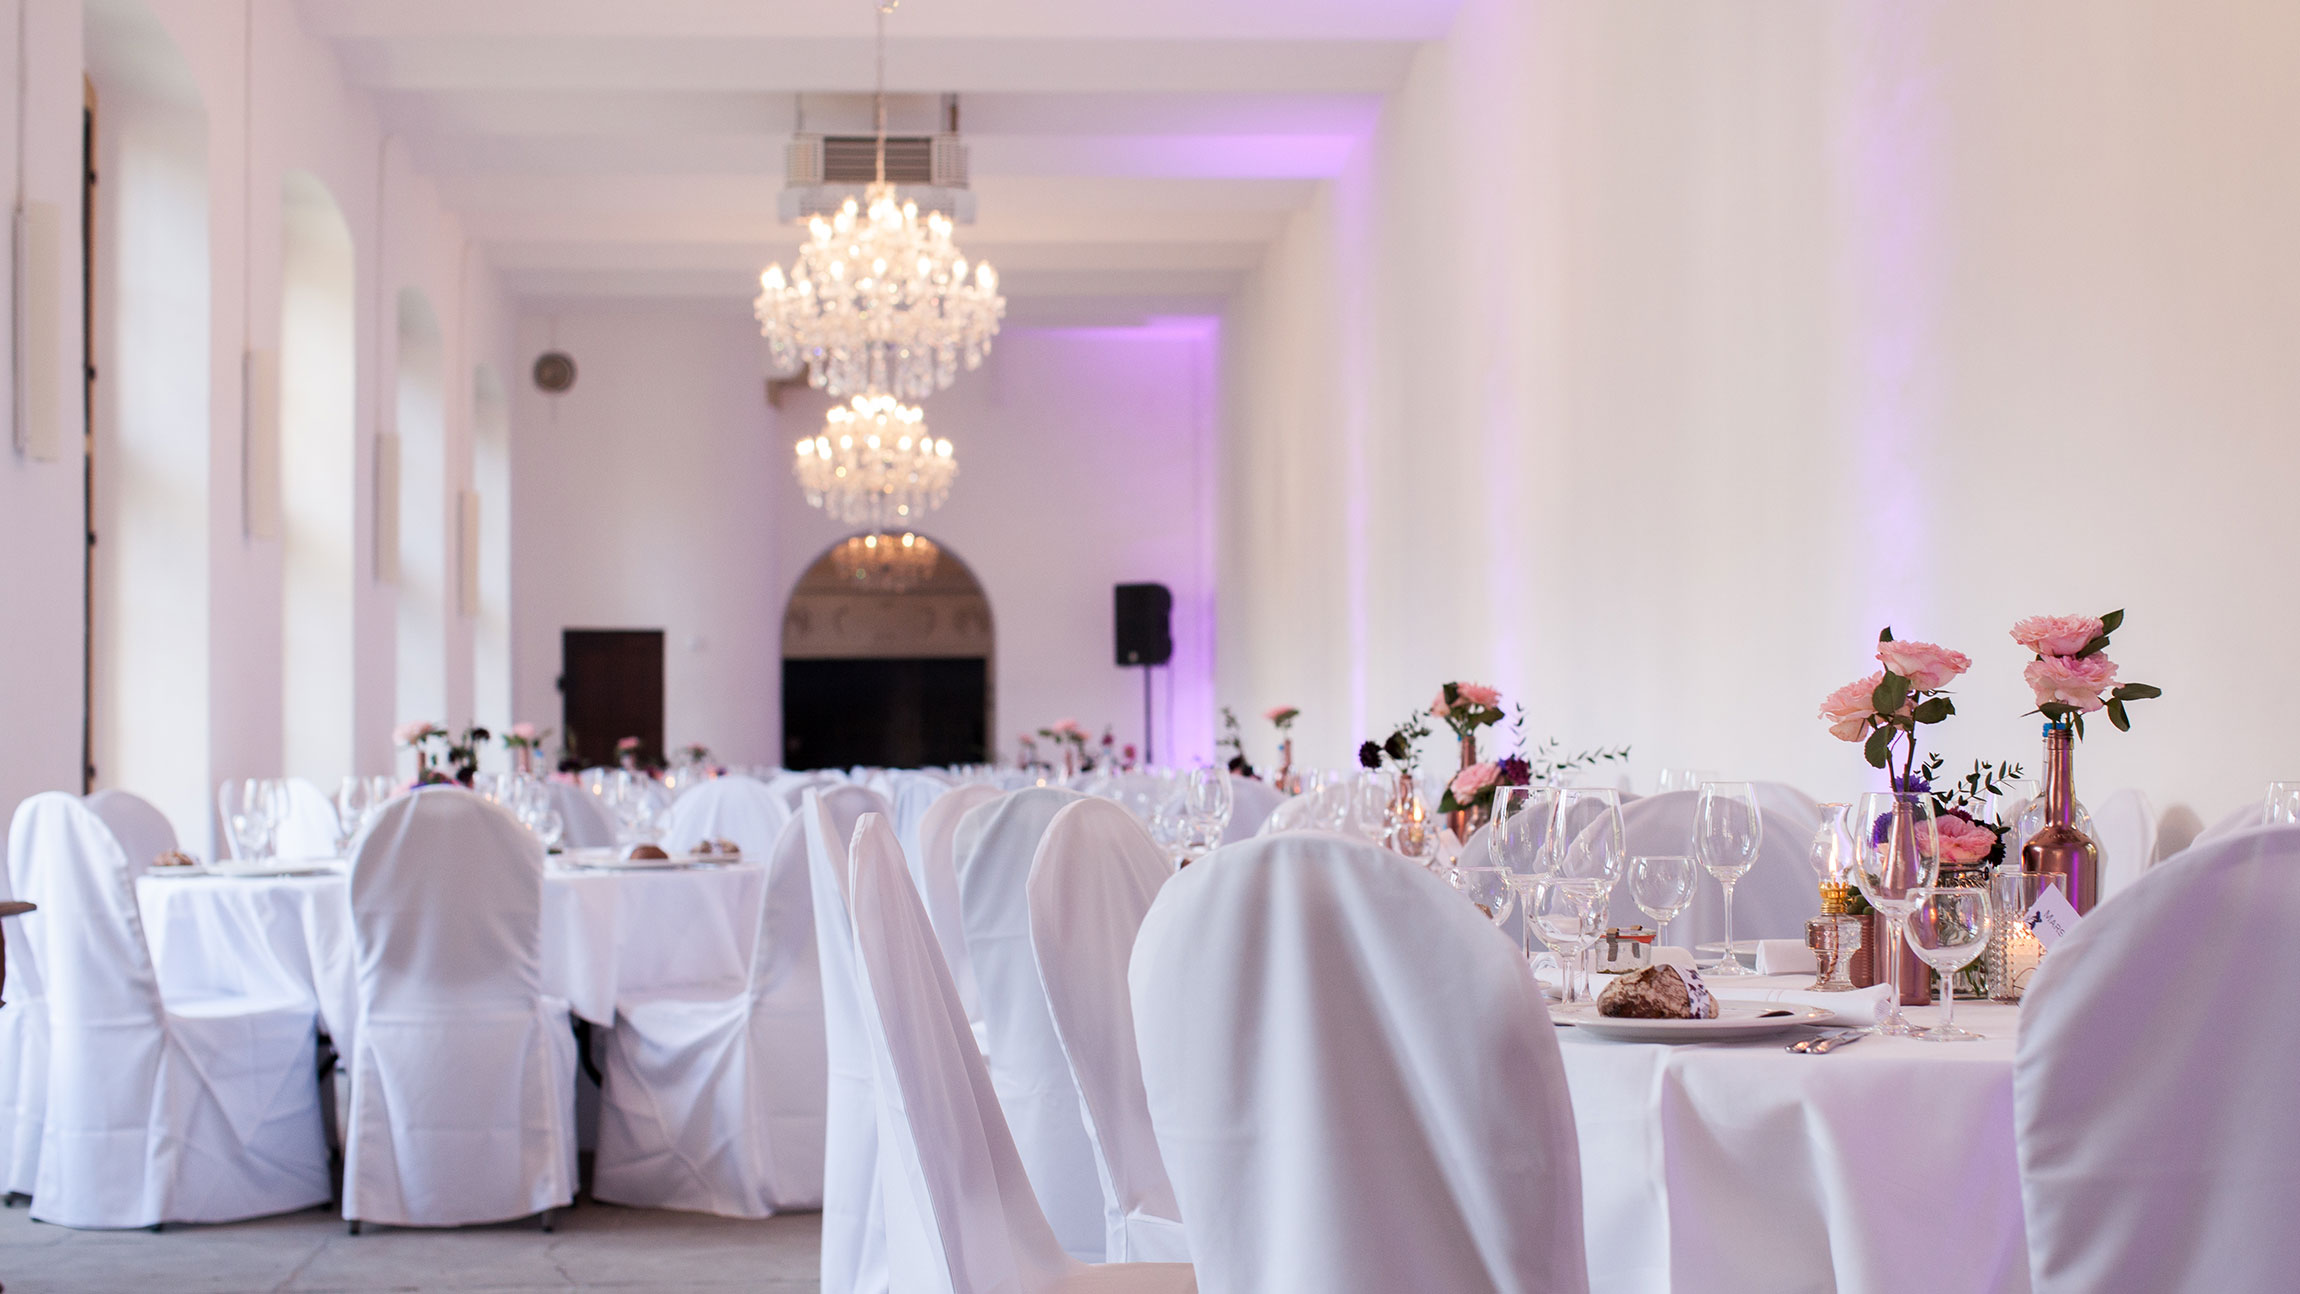 Privat-Catering und Partyservice